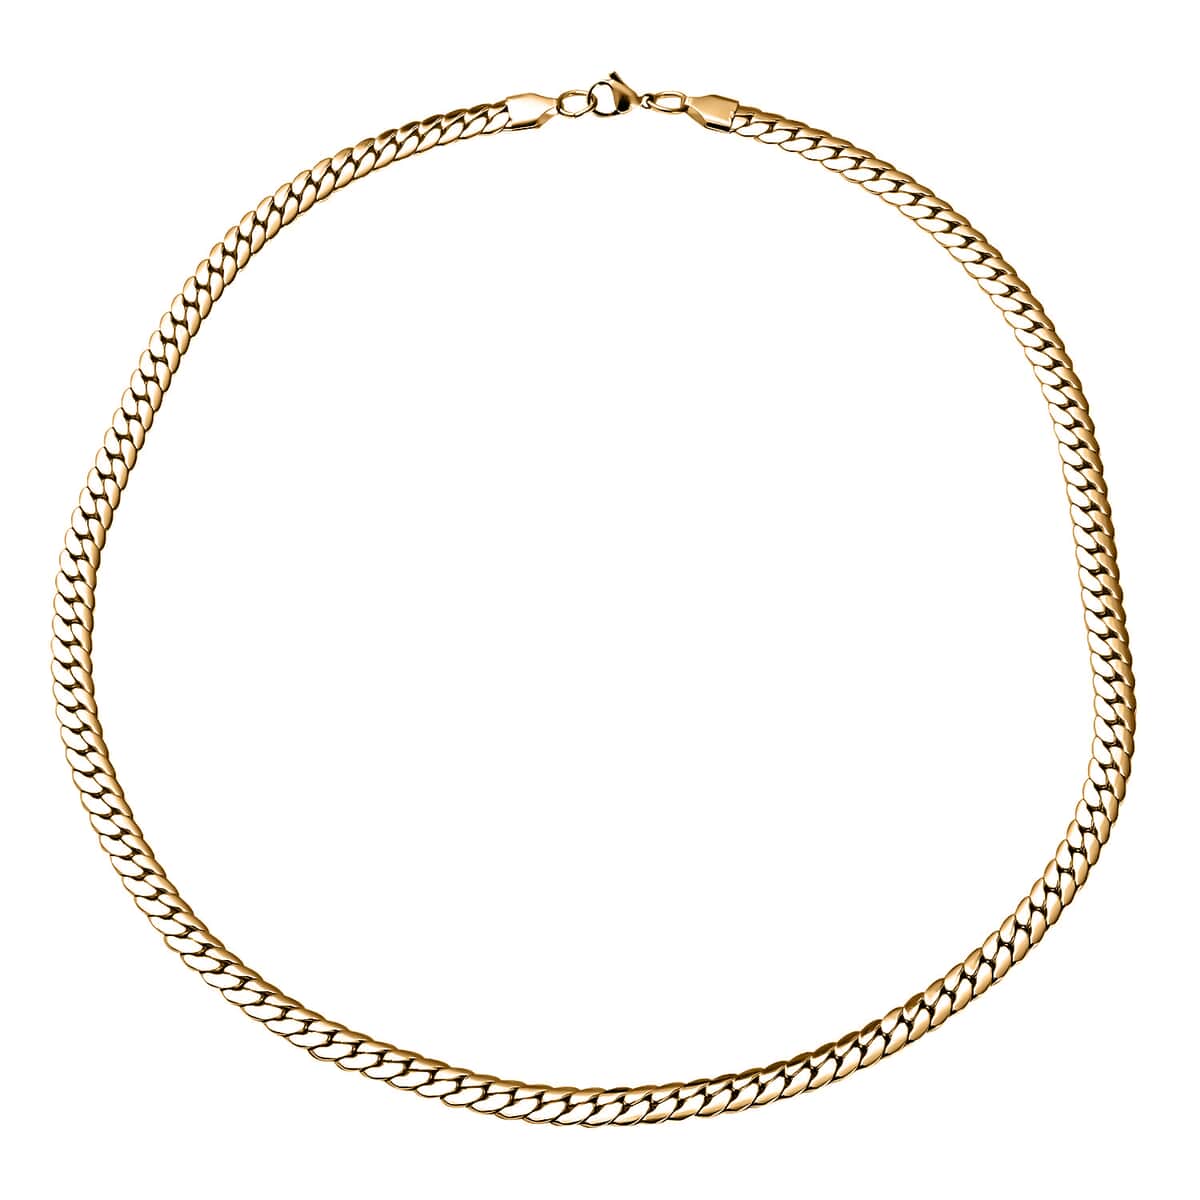 Herringbone Chain Necklace in ION Plated Yellow Gold Stainless Steel 24 Inches  46.50 Grams image number 0